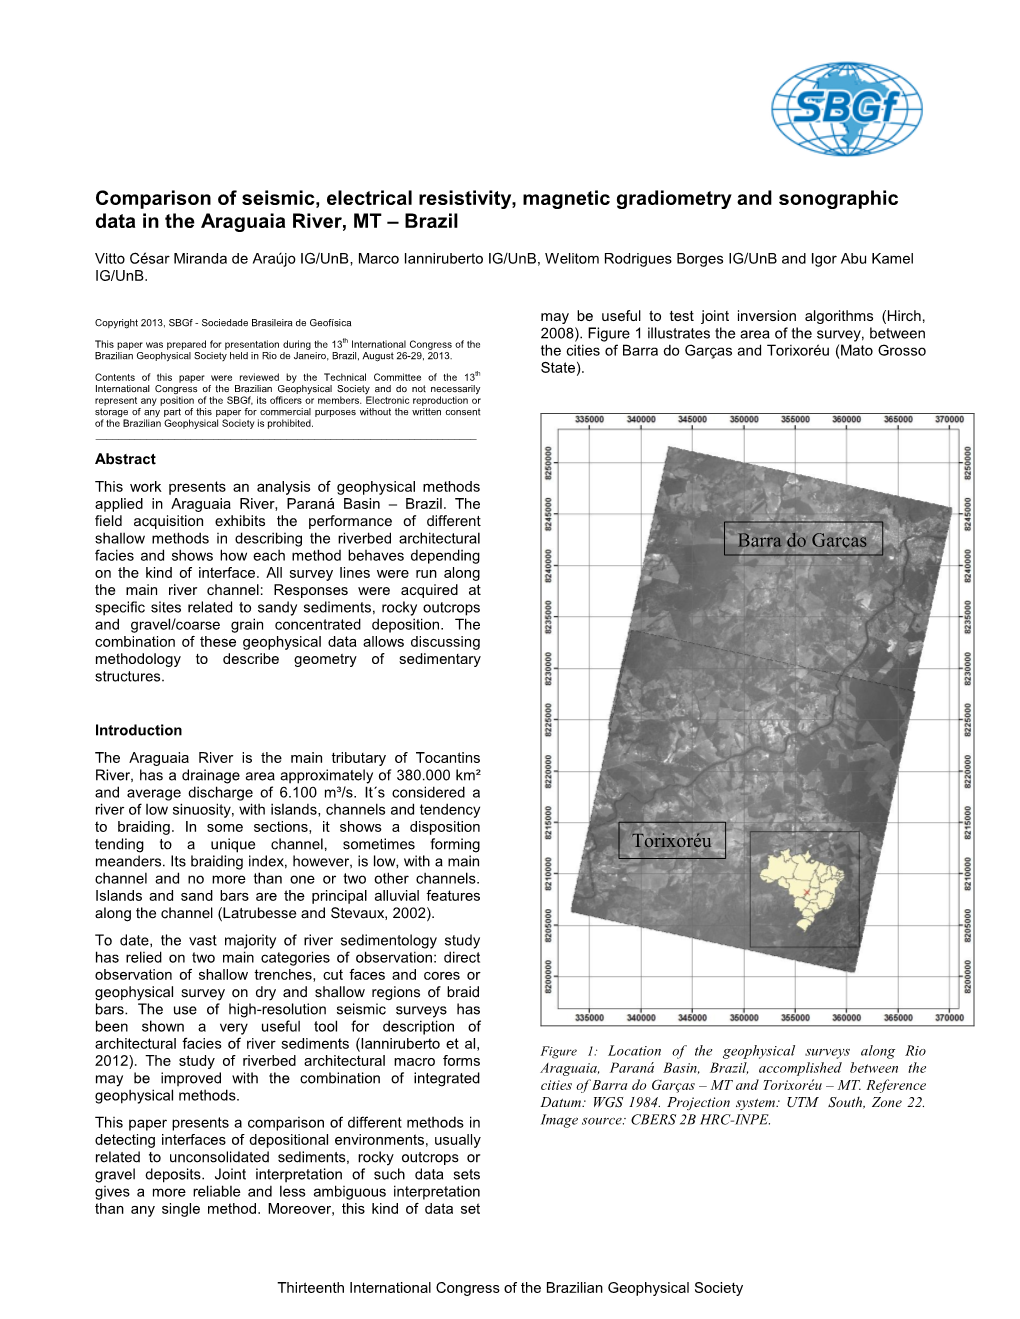 Comparison of Seismic, Electrical Resistivity, Magnetic Gradiometry and Sonographic Data in the Araguaia River, MT – Brazil